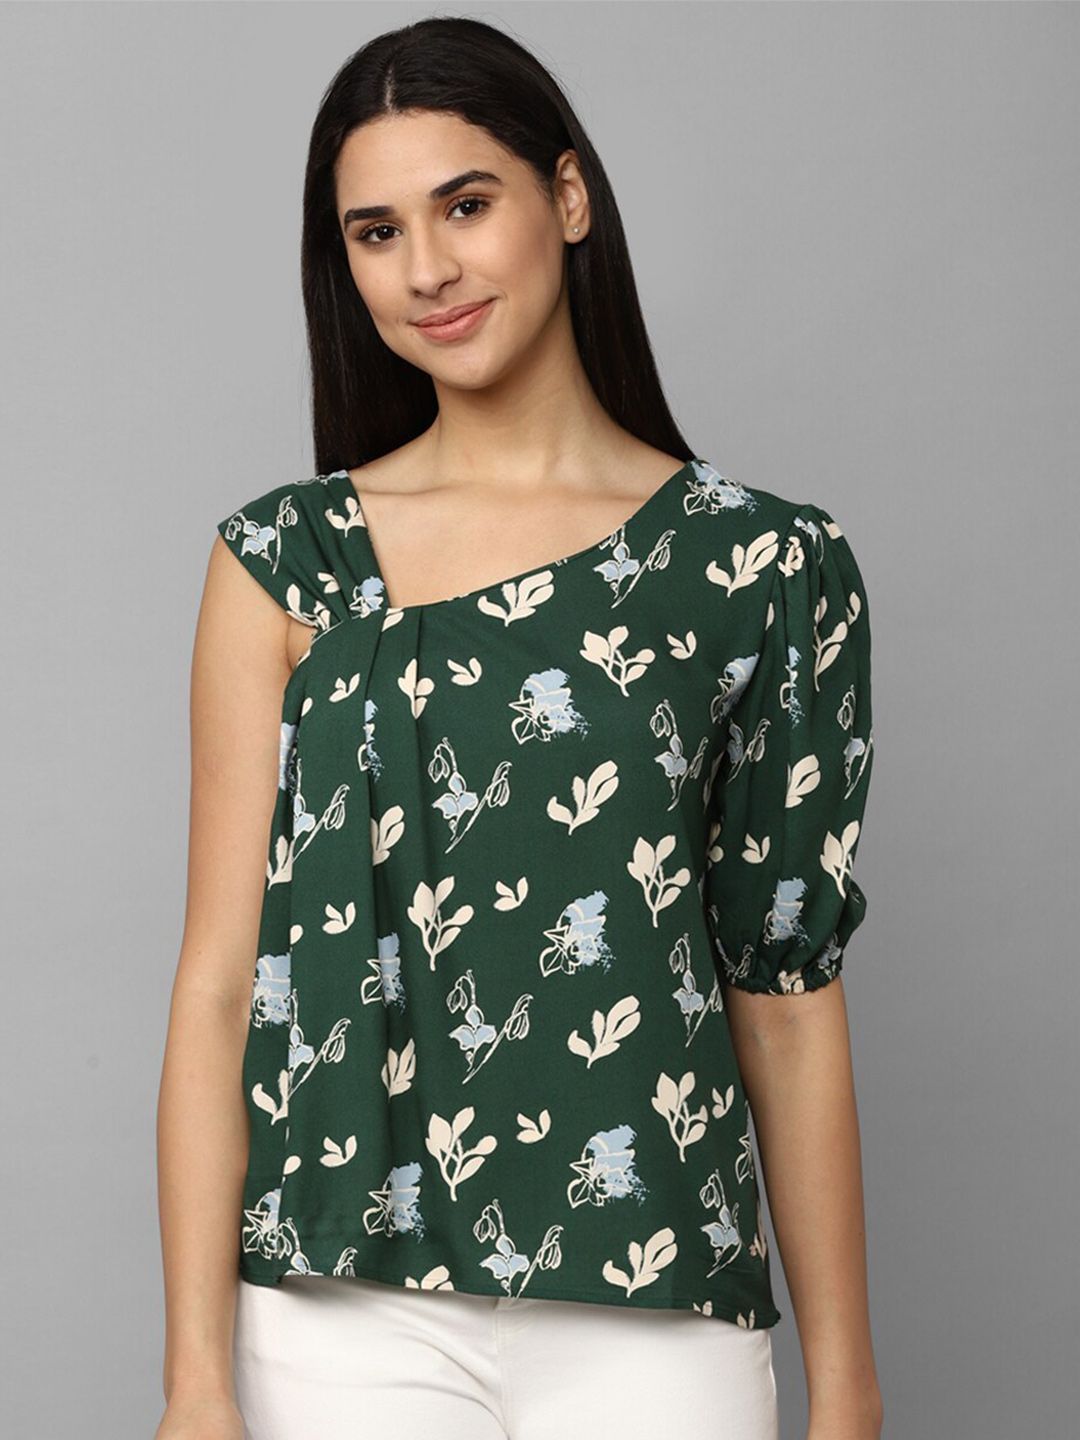 Allen Solly Woman Floral Printed Top Price in India